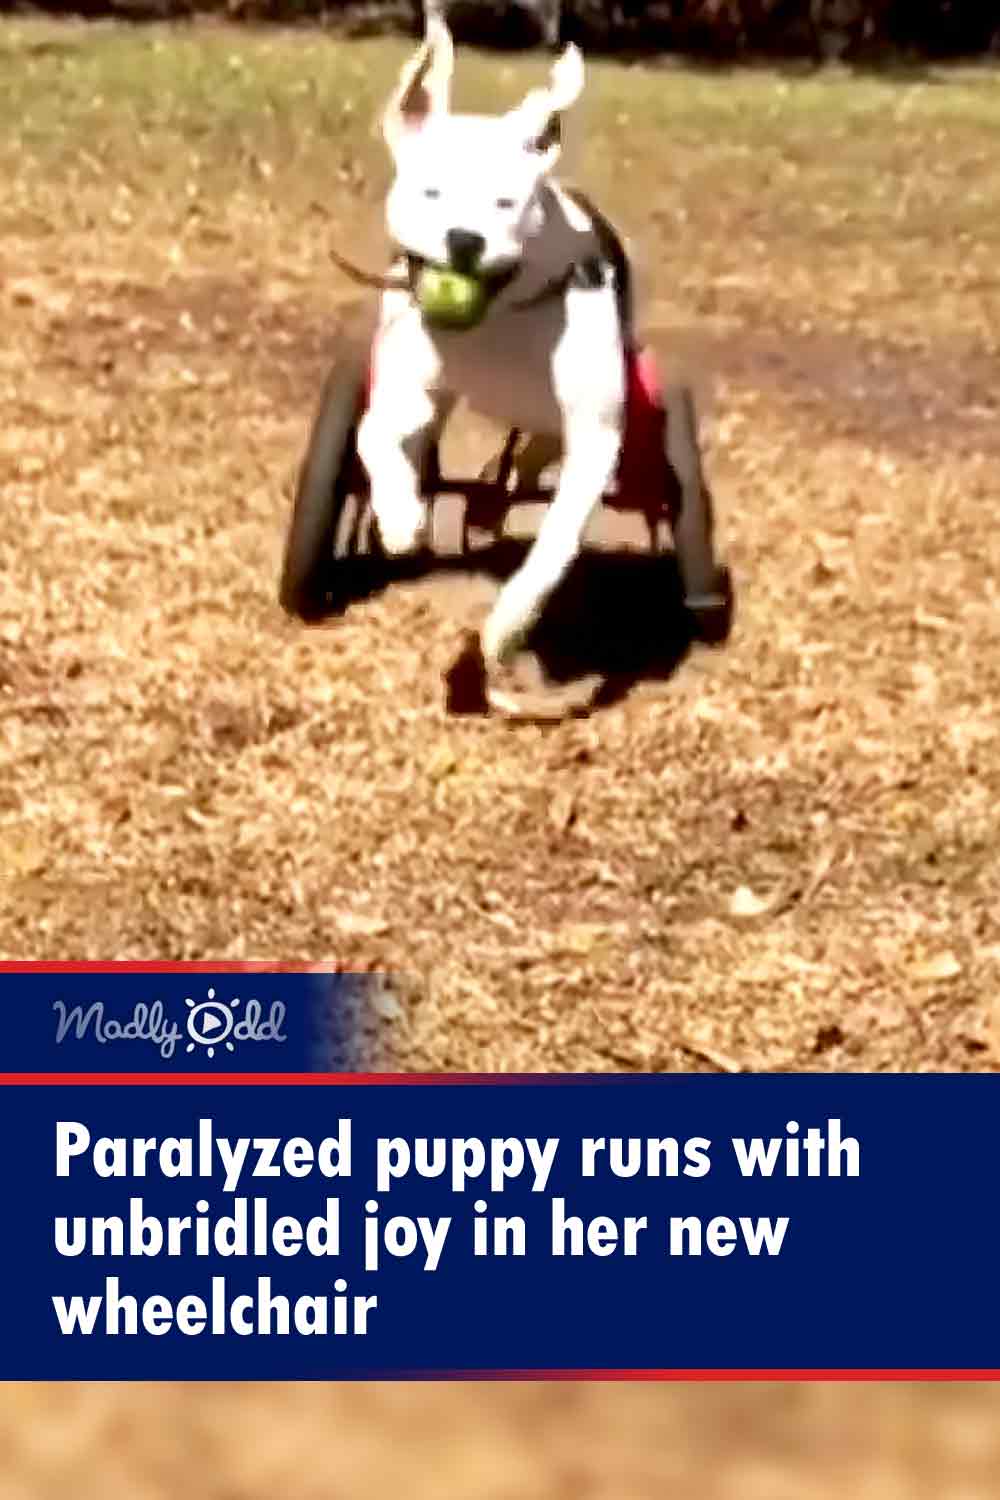 Paralyzed puppy runs with unbridled joy in her new wheelchair